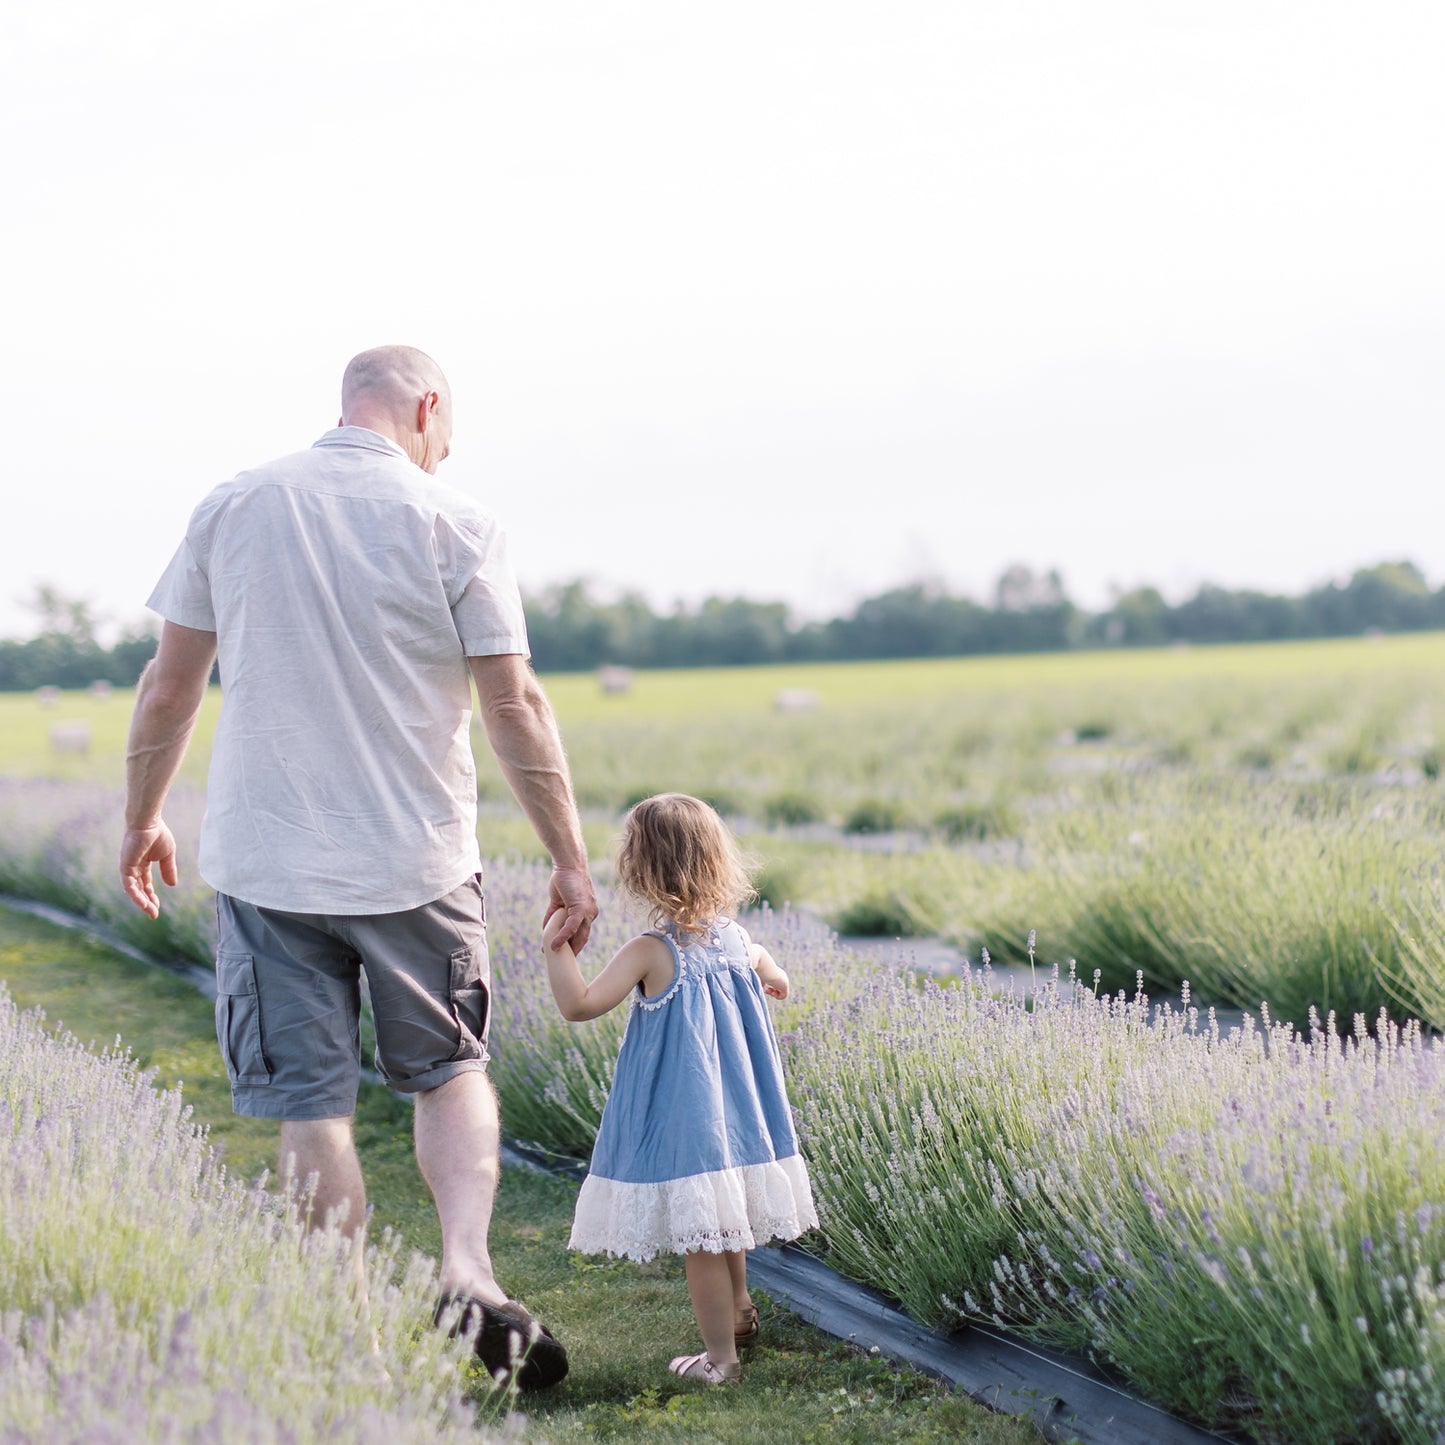 White man holds small child's hand while walking through rows of soft purple lavender blooms